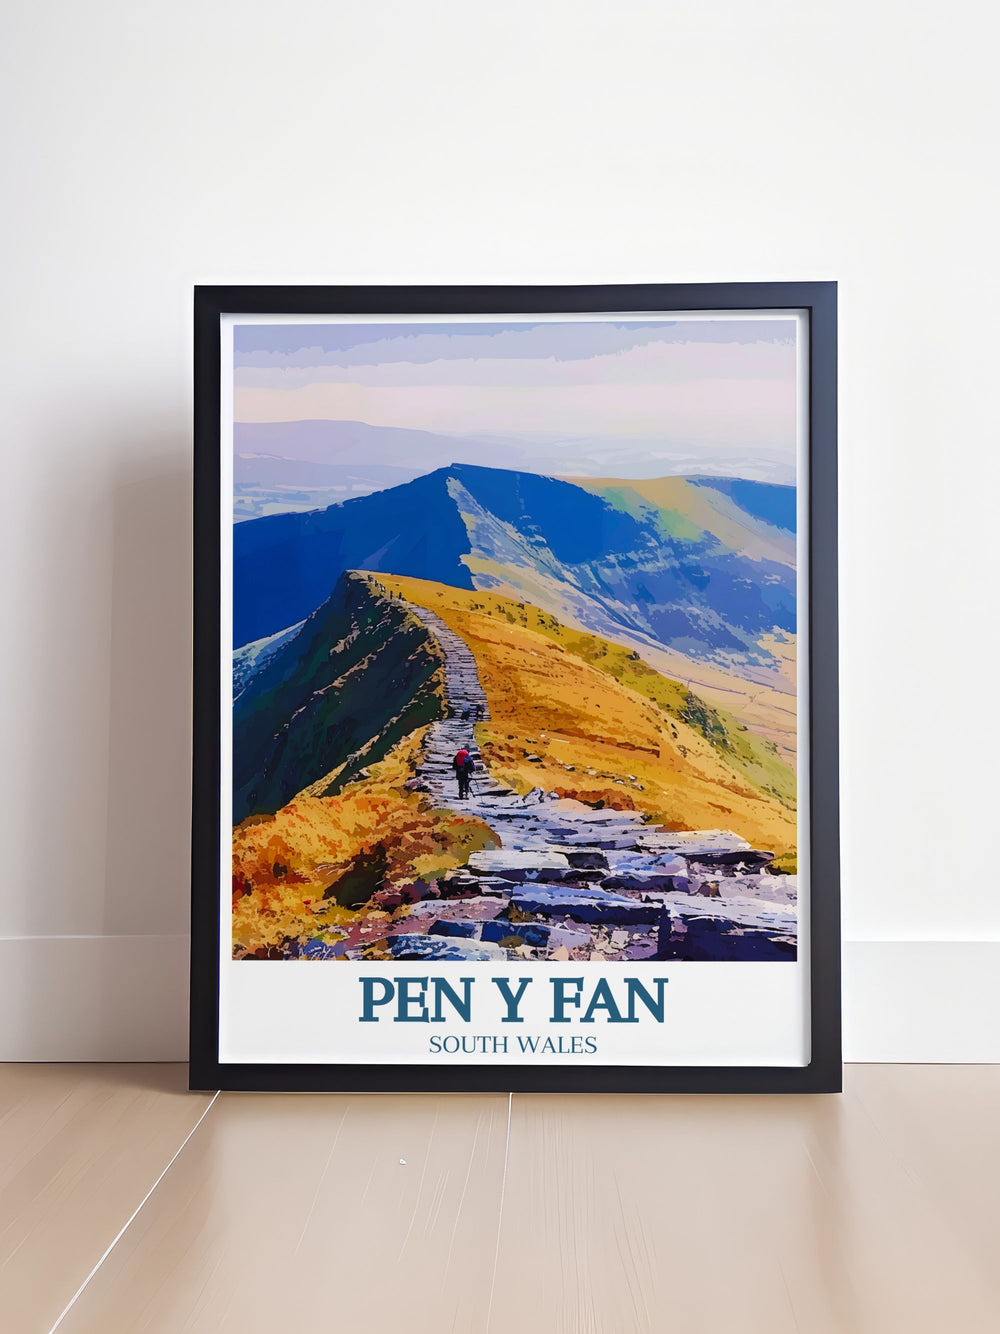 Stunning Brecon Beacons Travel Poster showcasing the iconic Pen Y Fan Mountain. This South Wales art print is ideal for those who appreciate natural landscapes and want to add a touch of Welsh charm to their walls.